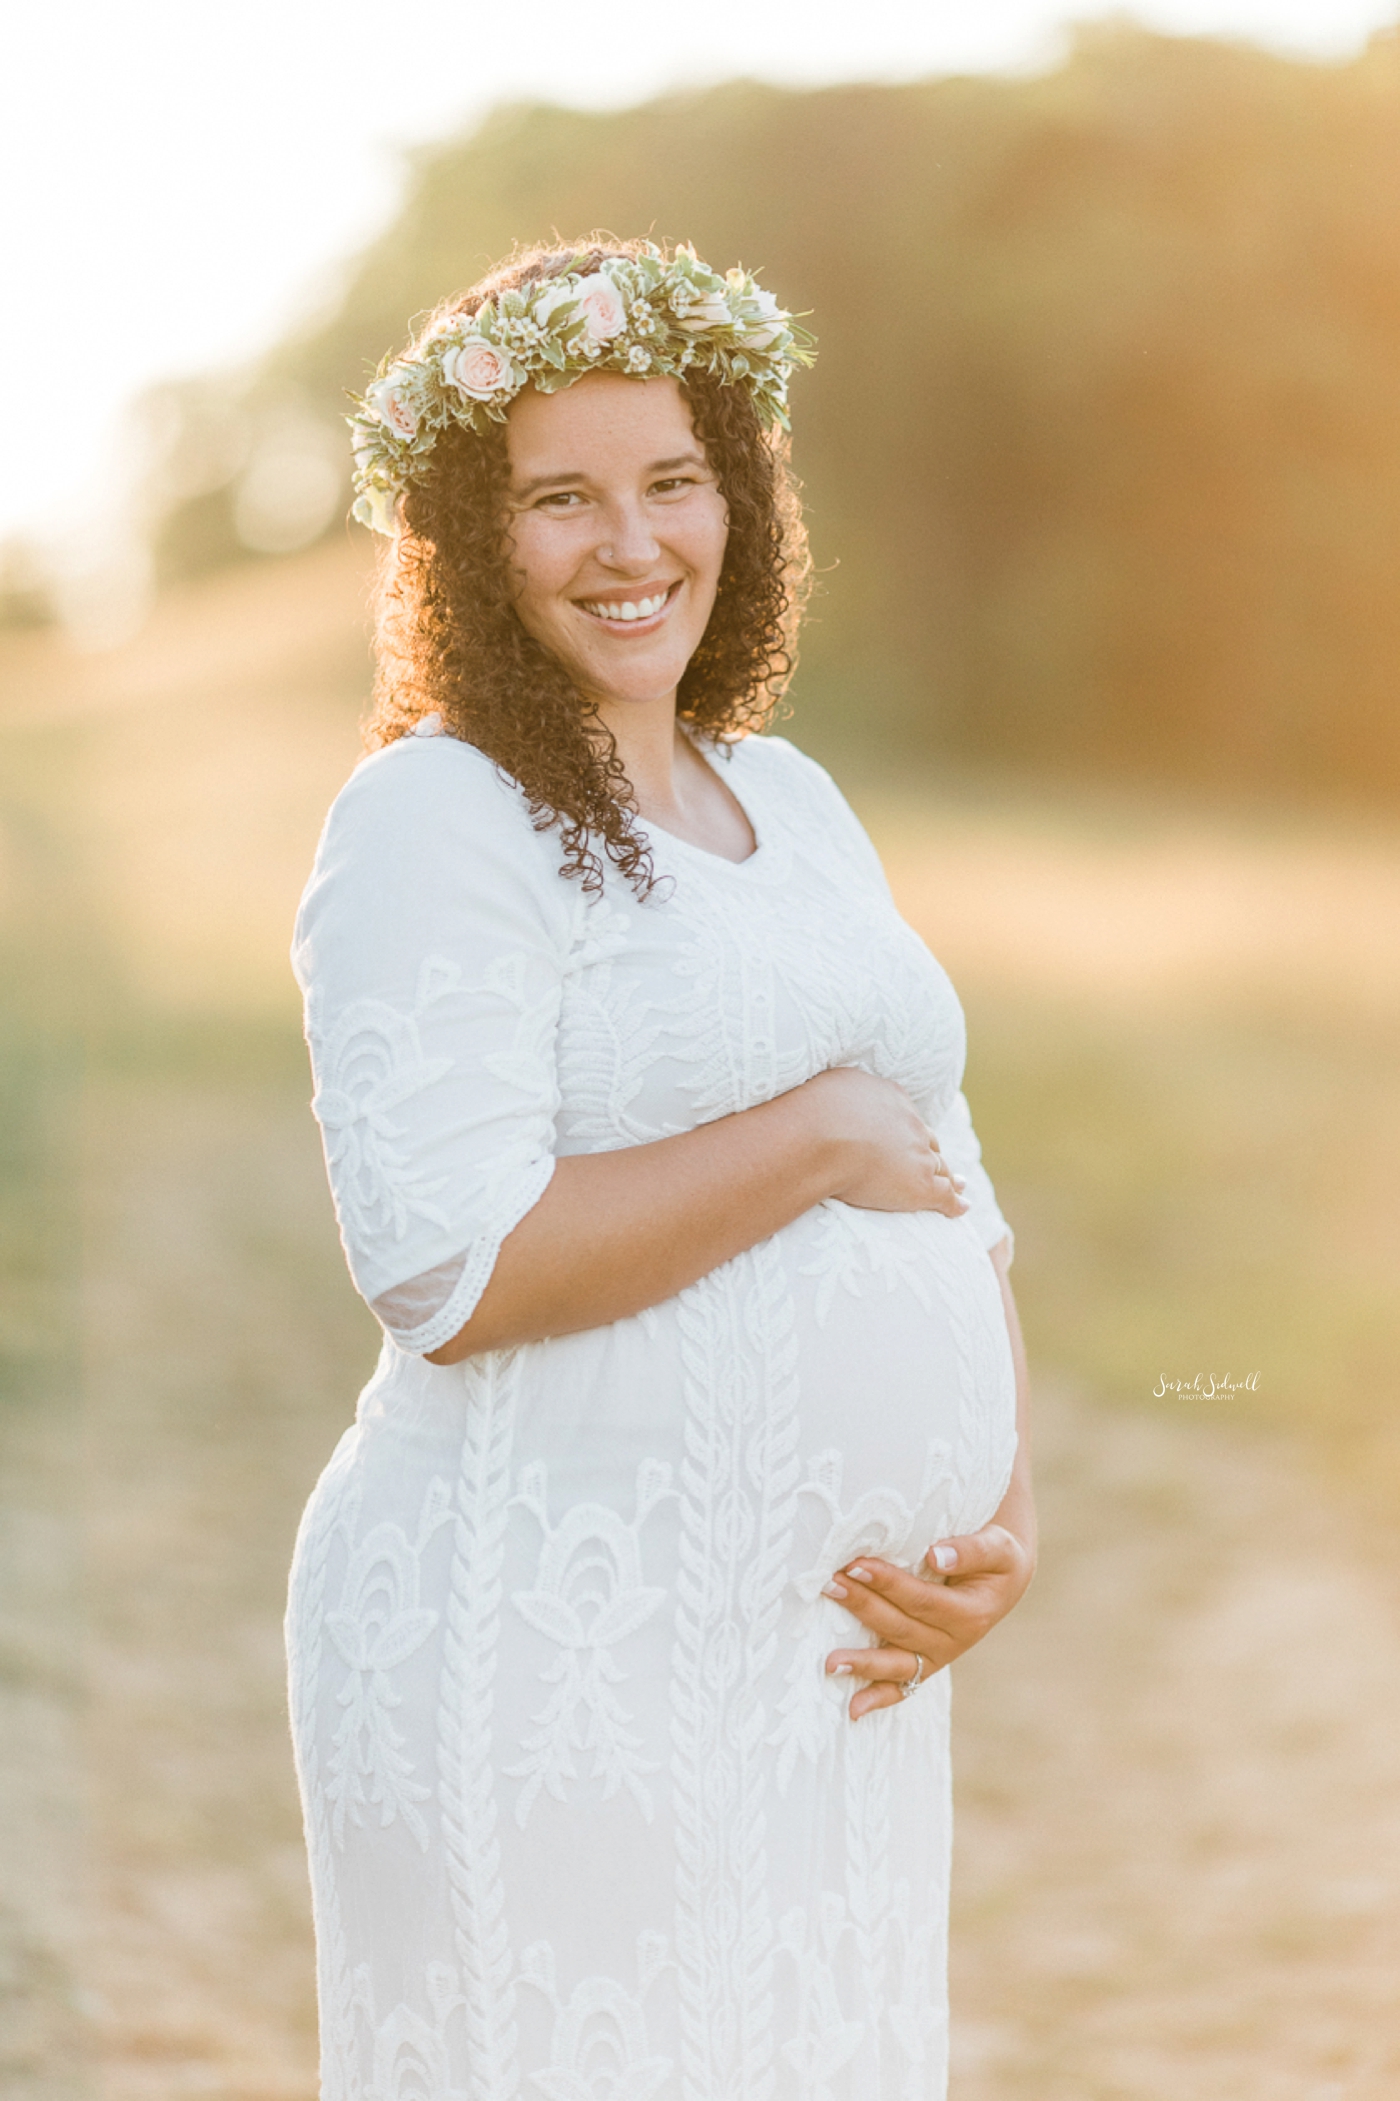 The sunset illuminates a pregnant woman wearing a white dress and flower crown. 